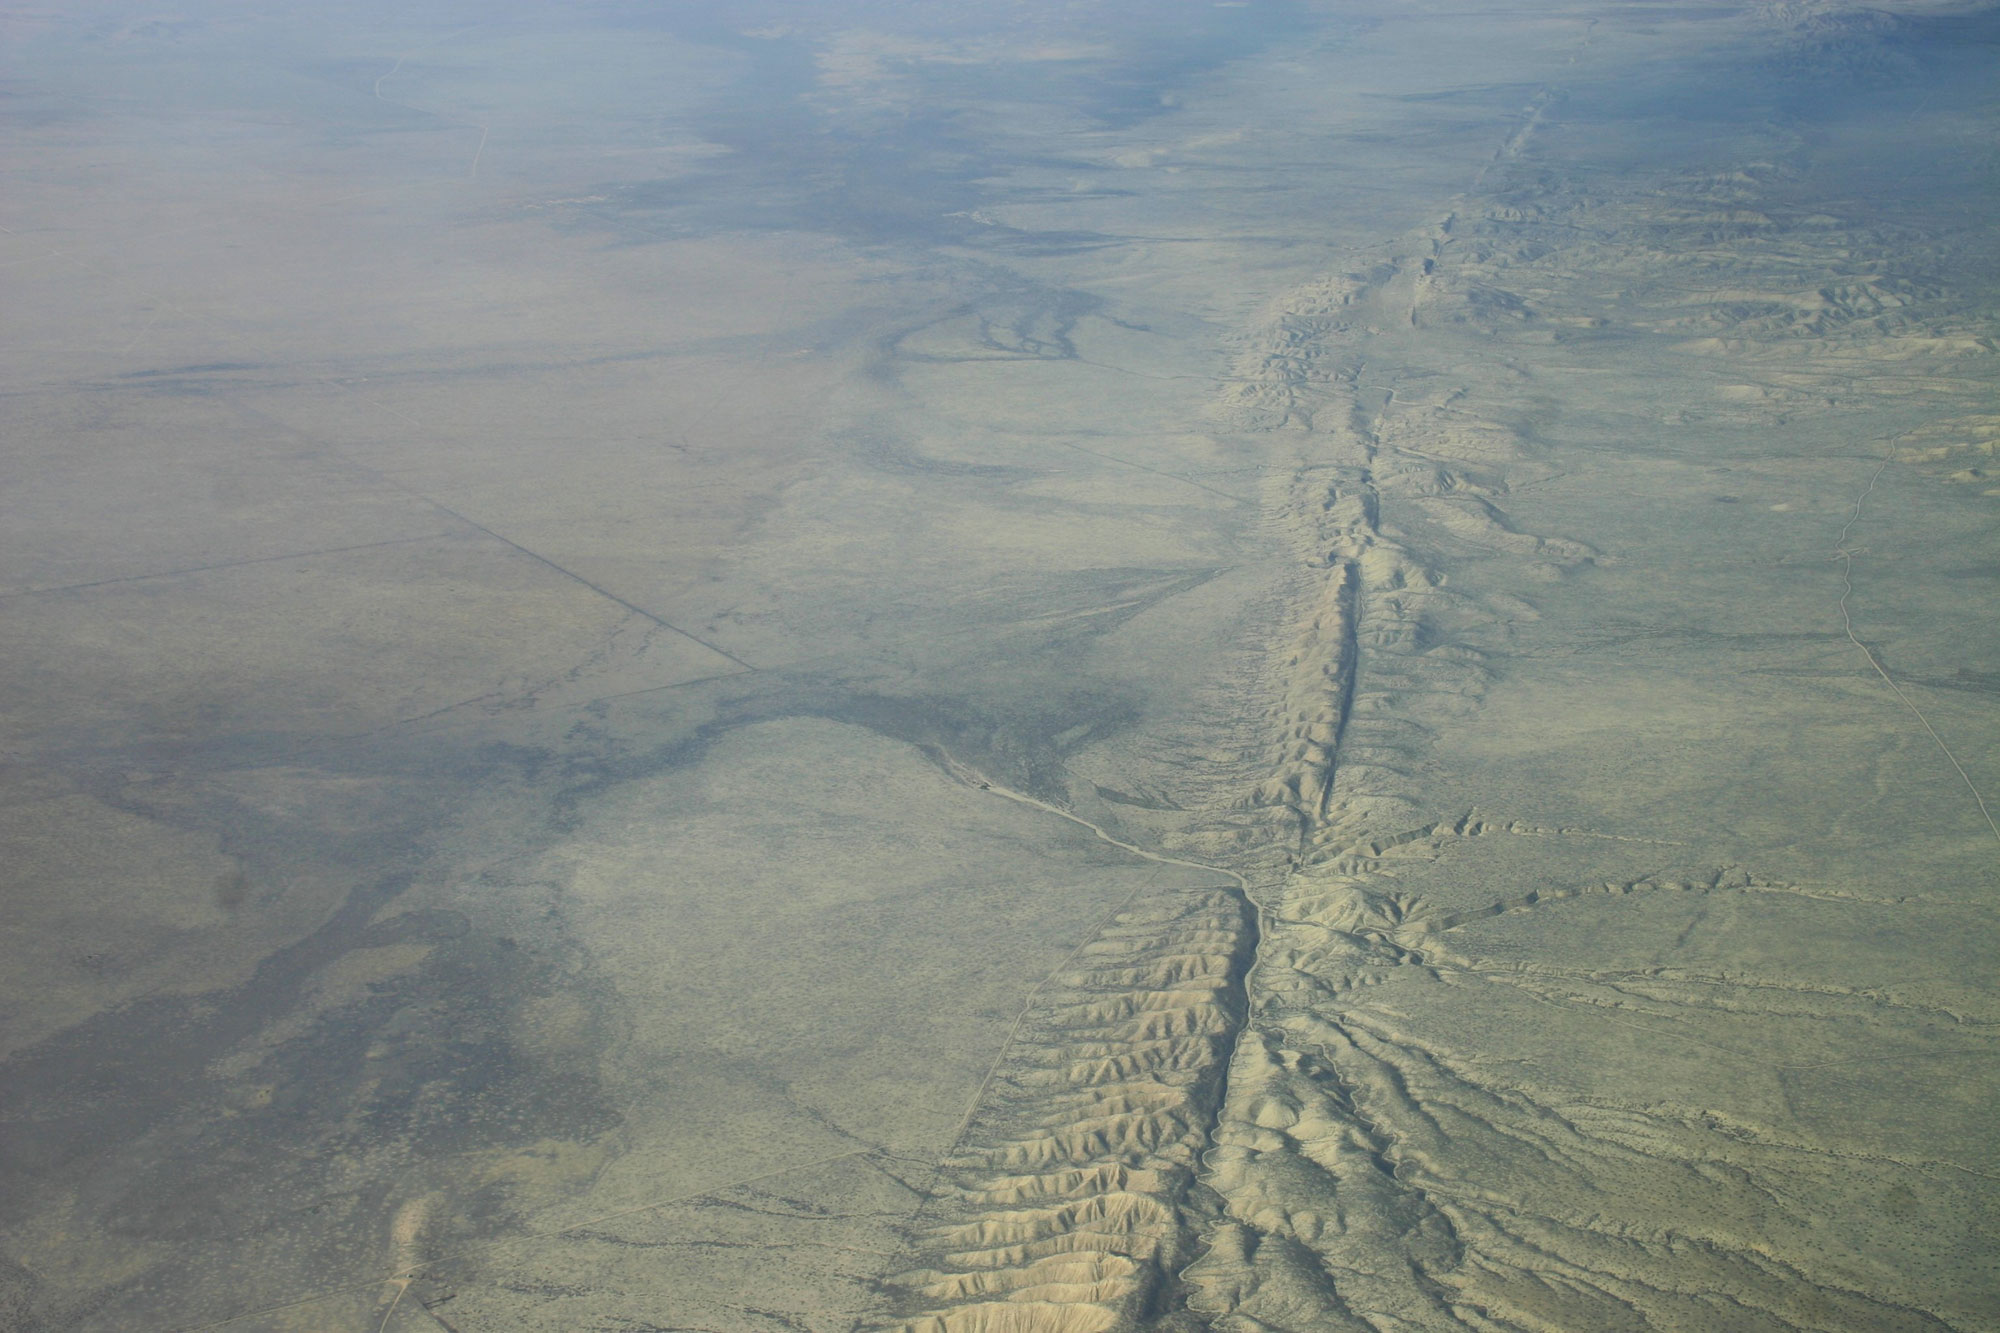 Aerial photo of the San Andreas fault running through a flat plain. The fault looks like a ridge with a trench running through its center.